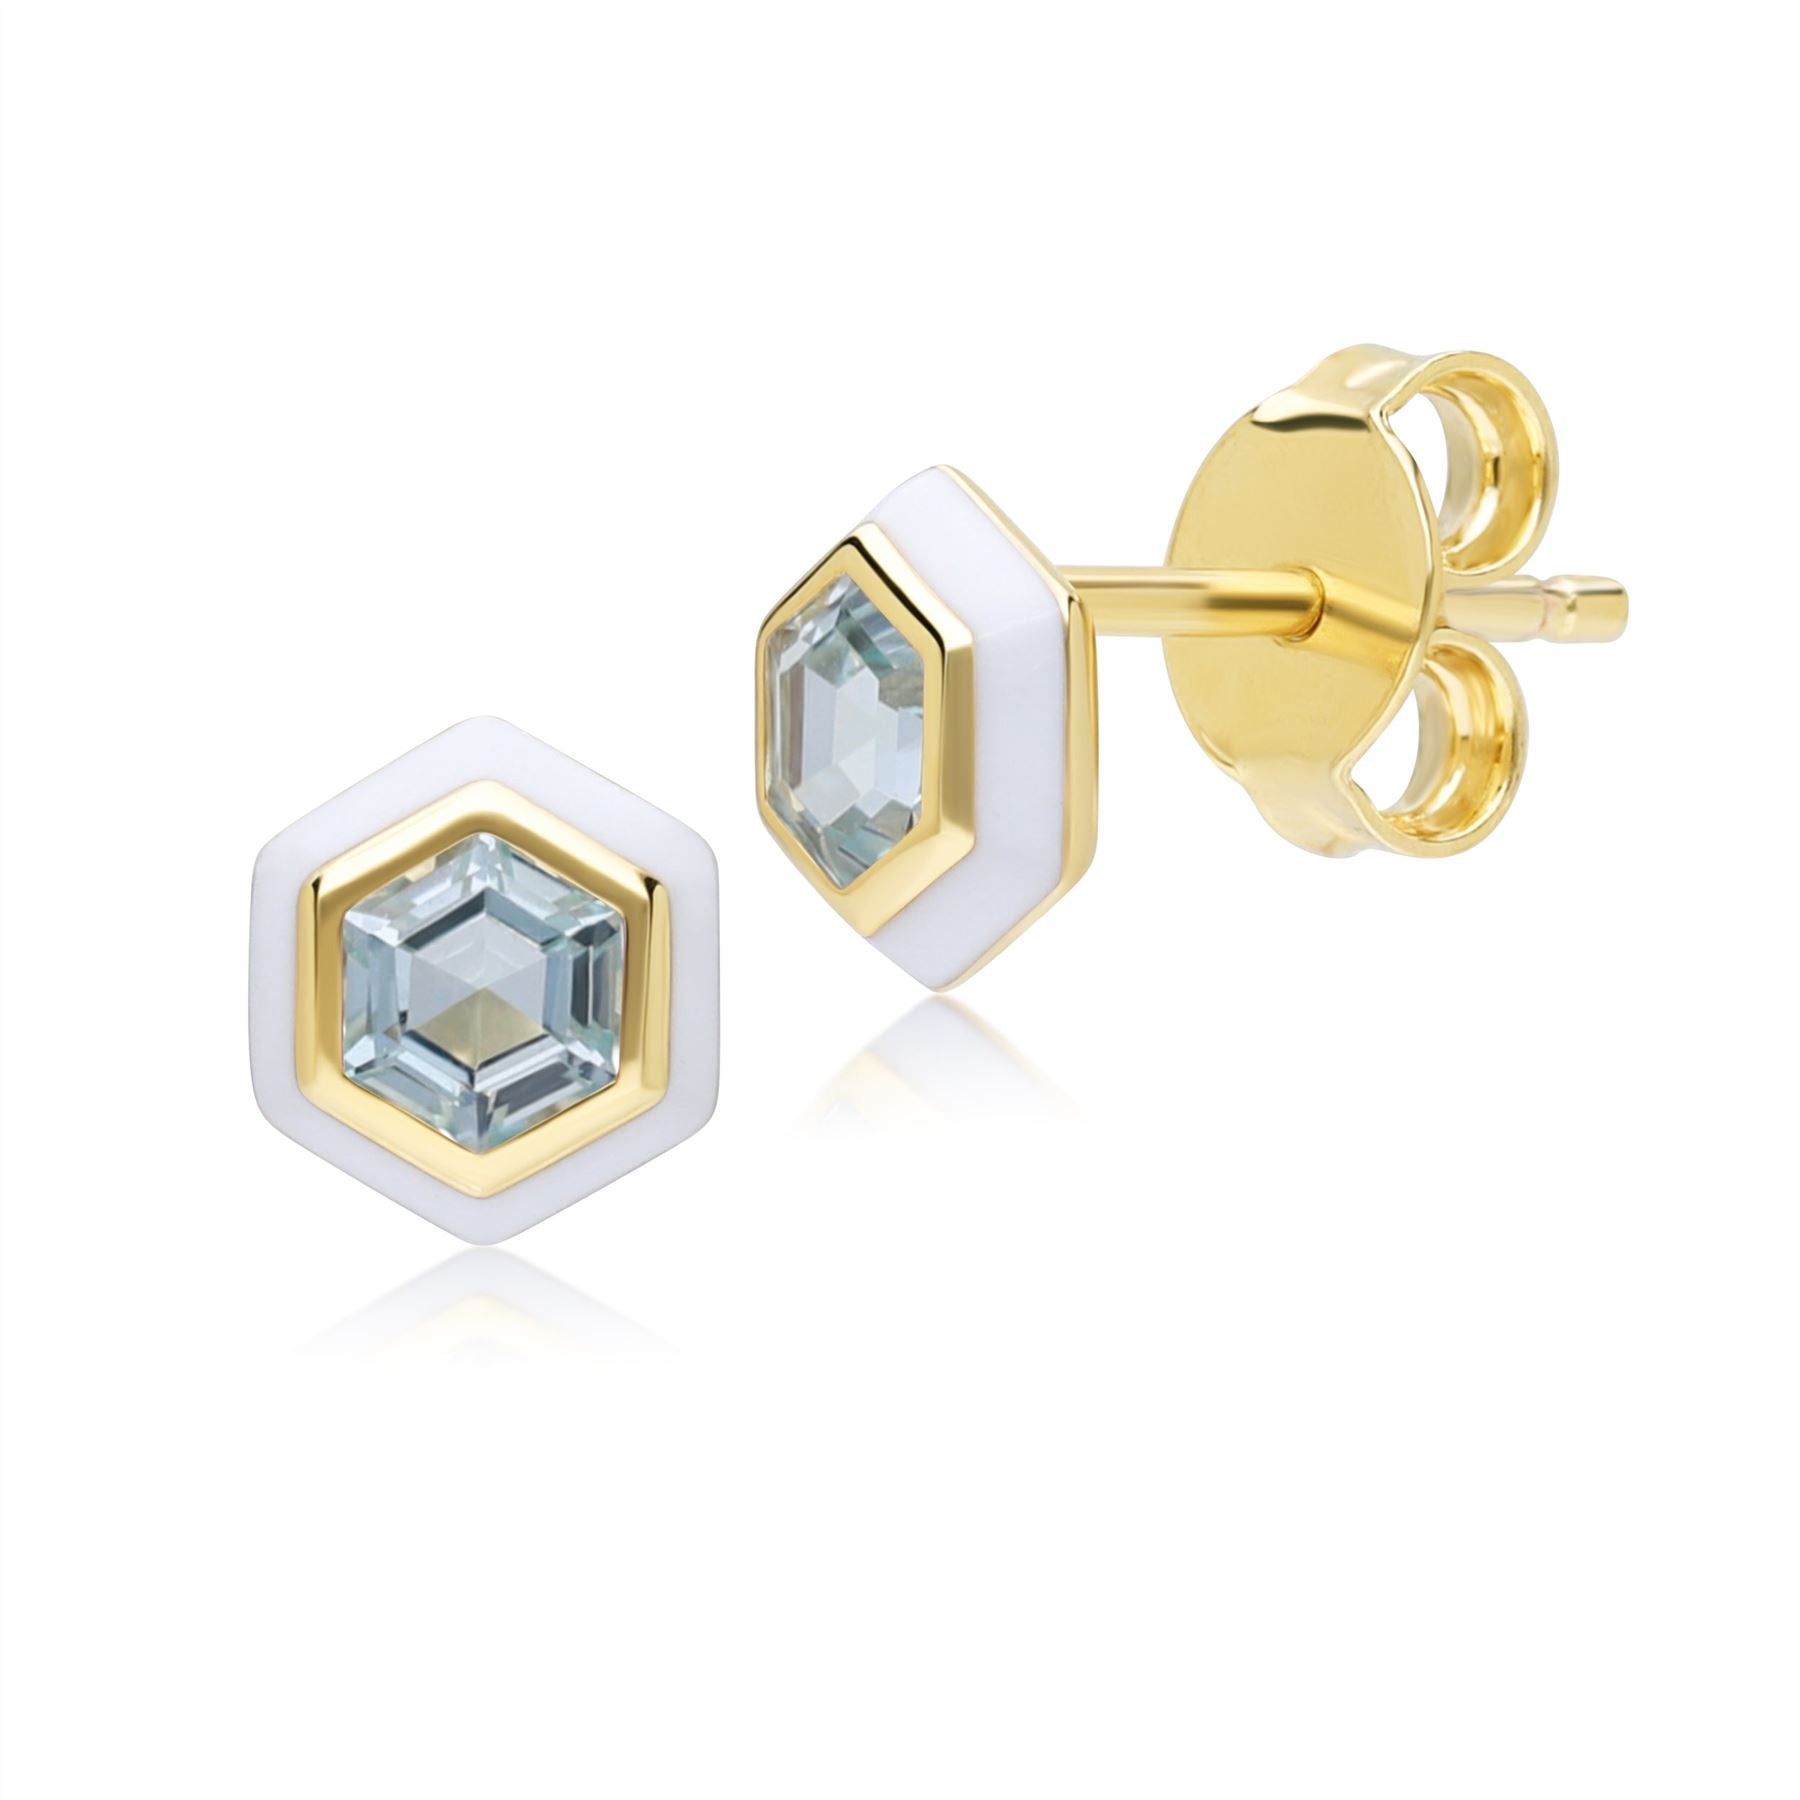 Image of Geometric Hex Blue Topaz and White Enamel Stud Earrings in Gold Plated Sterling Silver